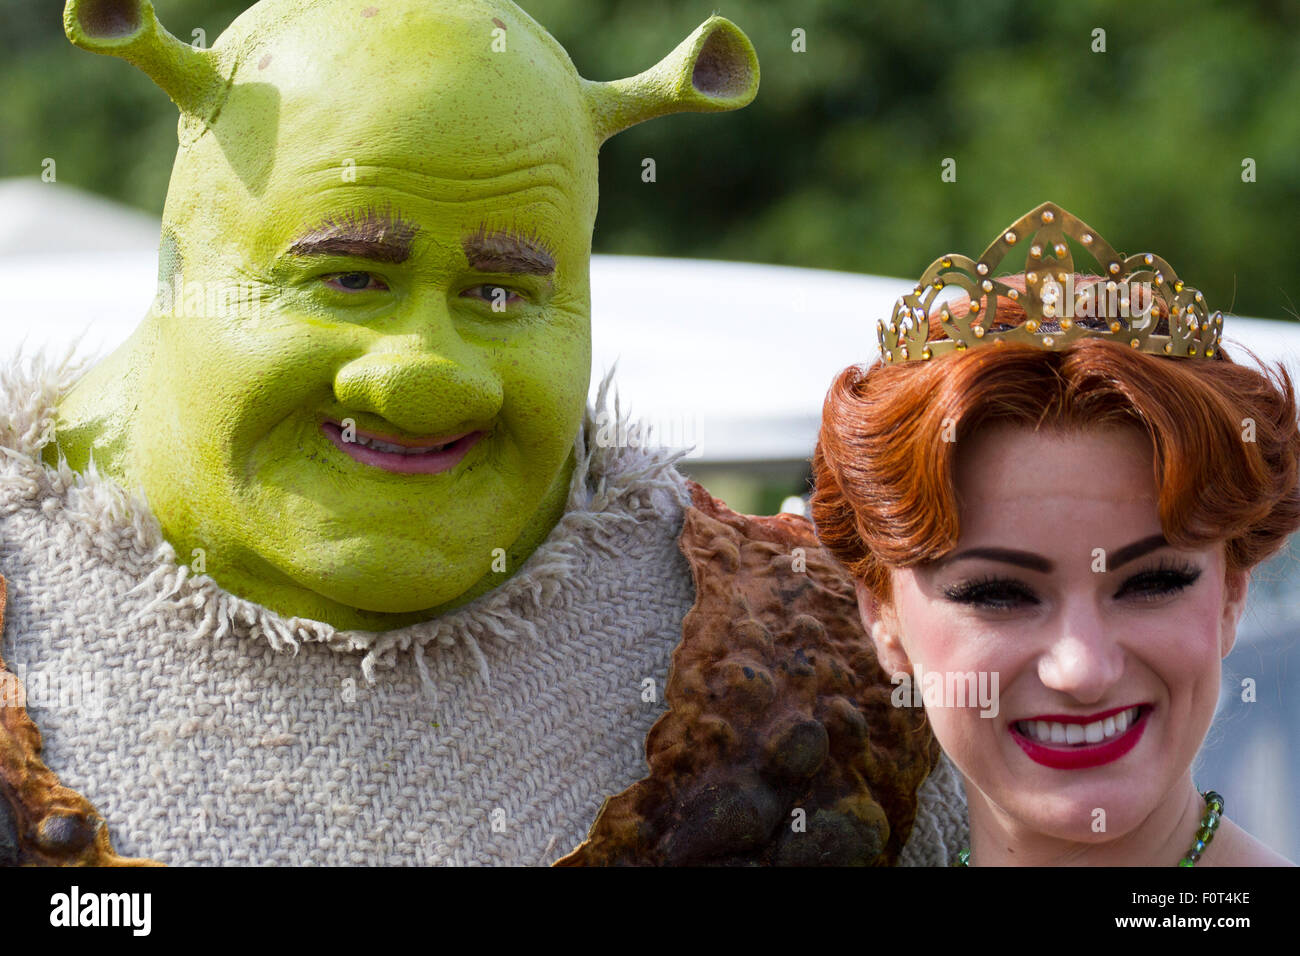 Shrek High Resolution Stock Photography And Images Alamy